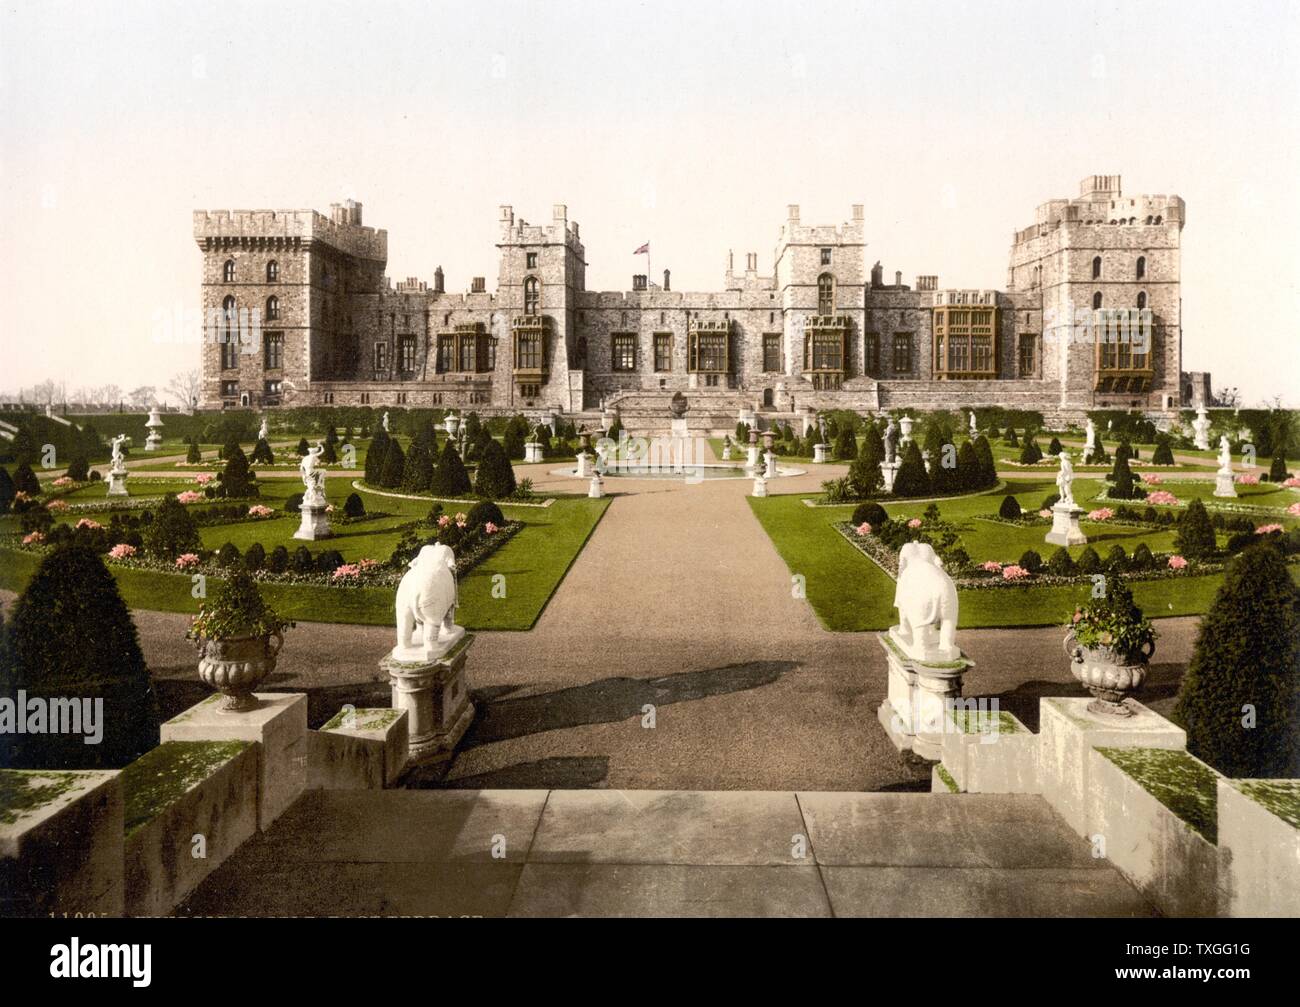 East Terrace, Windsor Castle, England. Located in Berkshire, Windsor is a royal residence and is notable for its architecture and its long association with the Royal Family. More than 500 people live and work here. Stock Photo